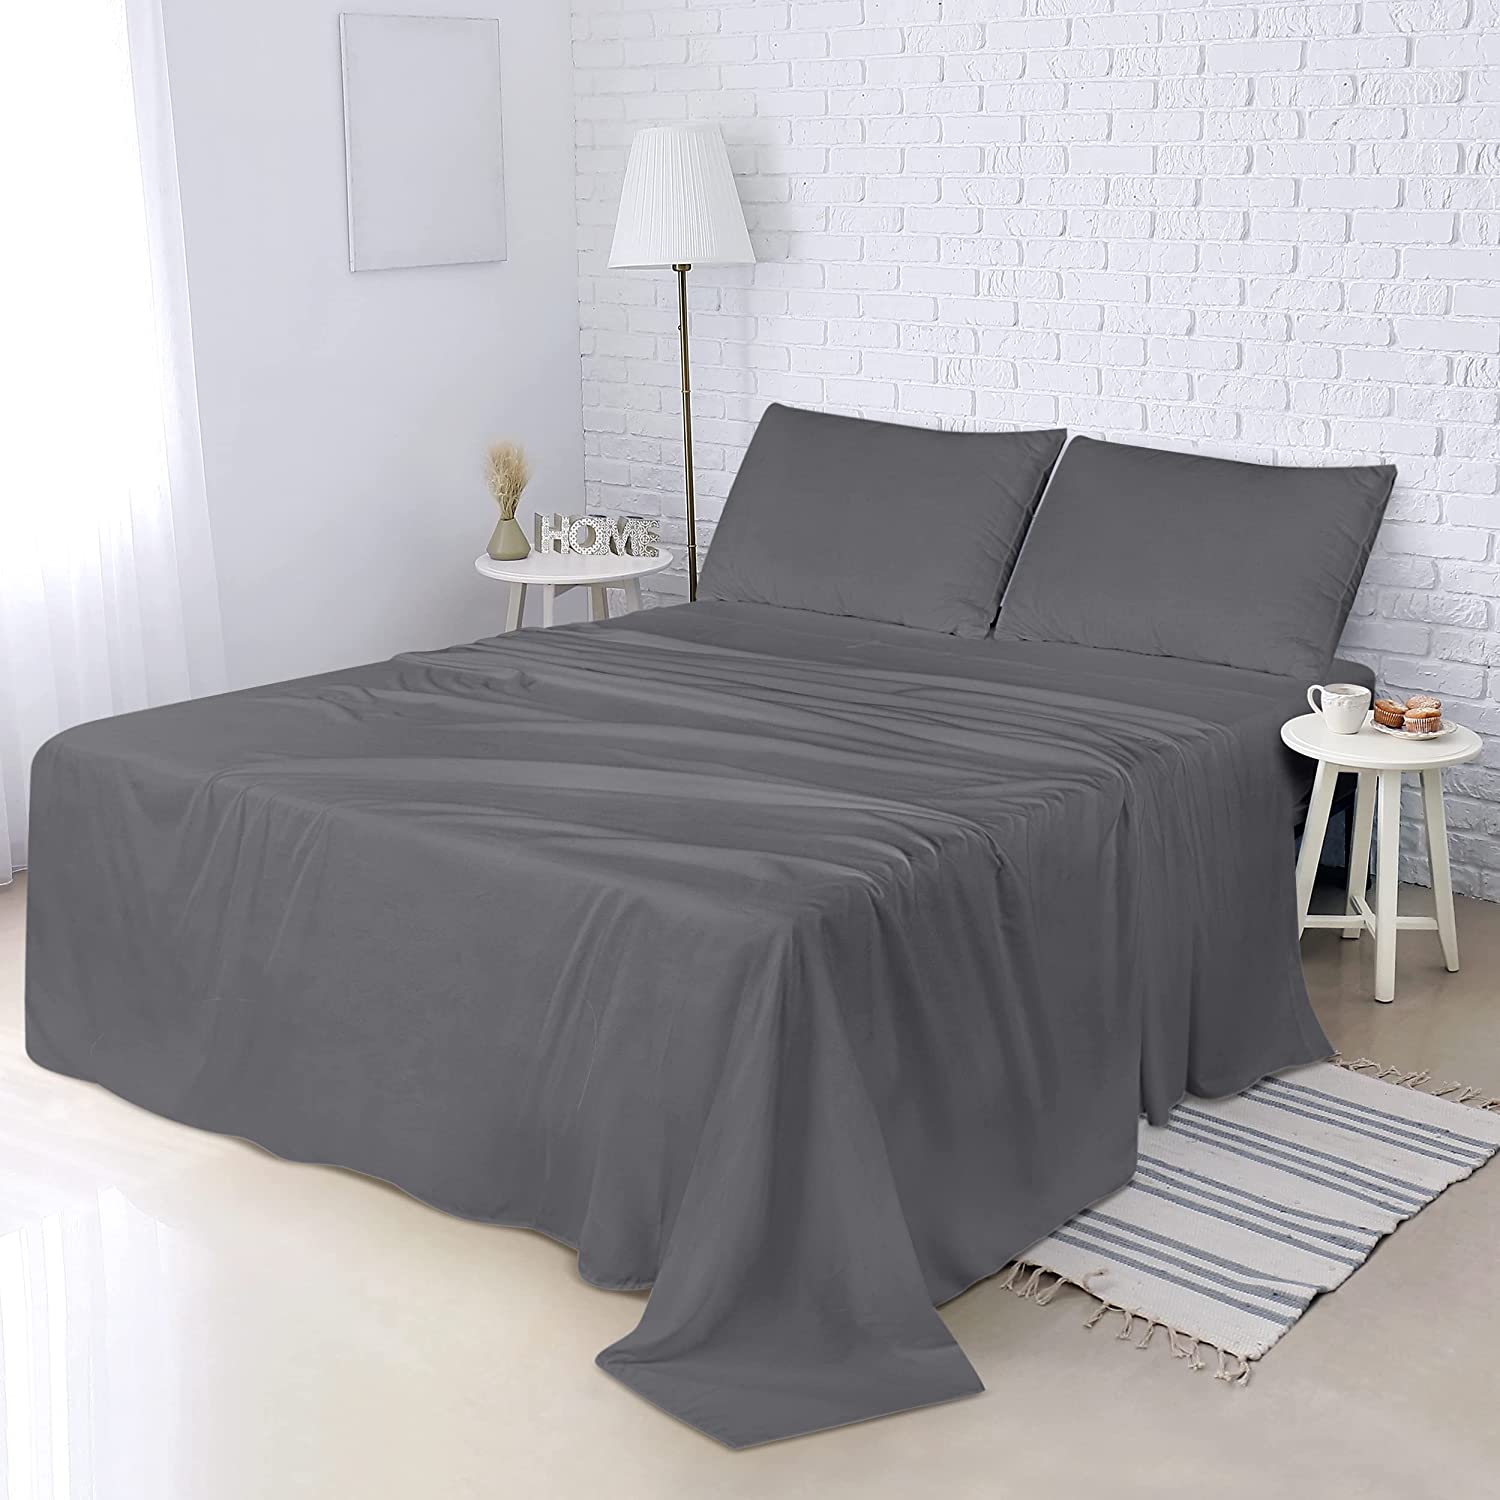 Utopia Bedding Full Bed Sheets Set - 4 Piece Bedding - Brushed Microfiber - Shrinkage and Fade Resistant - Easy Care (Full, Black)